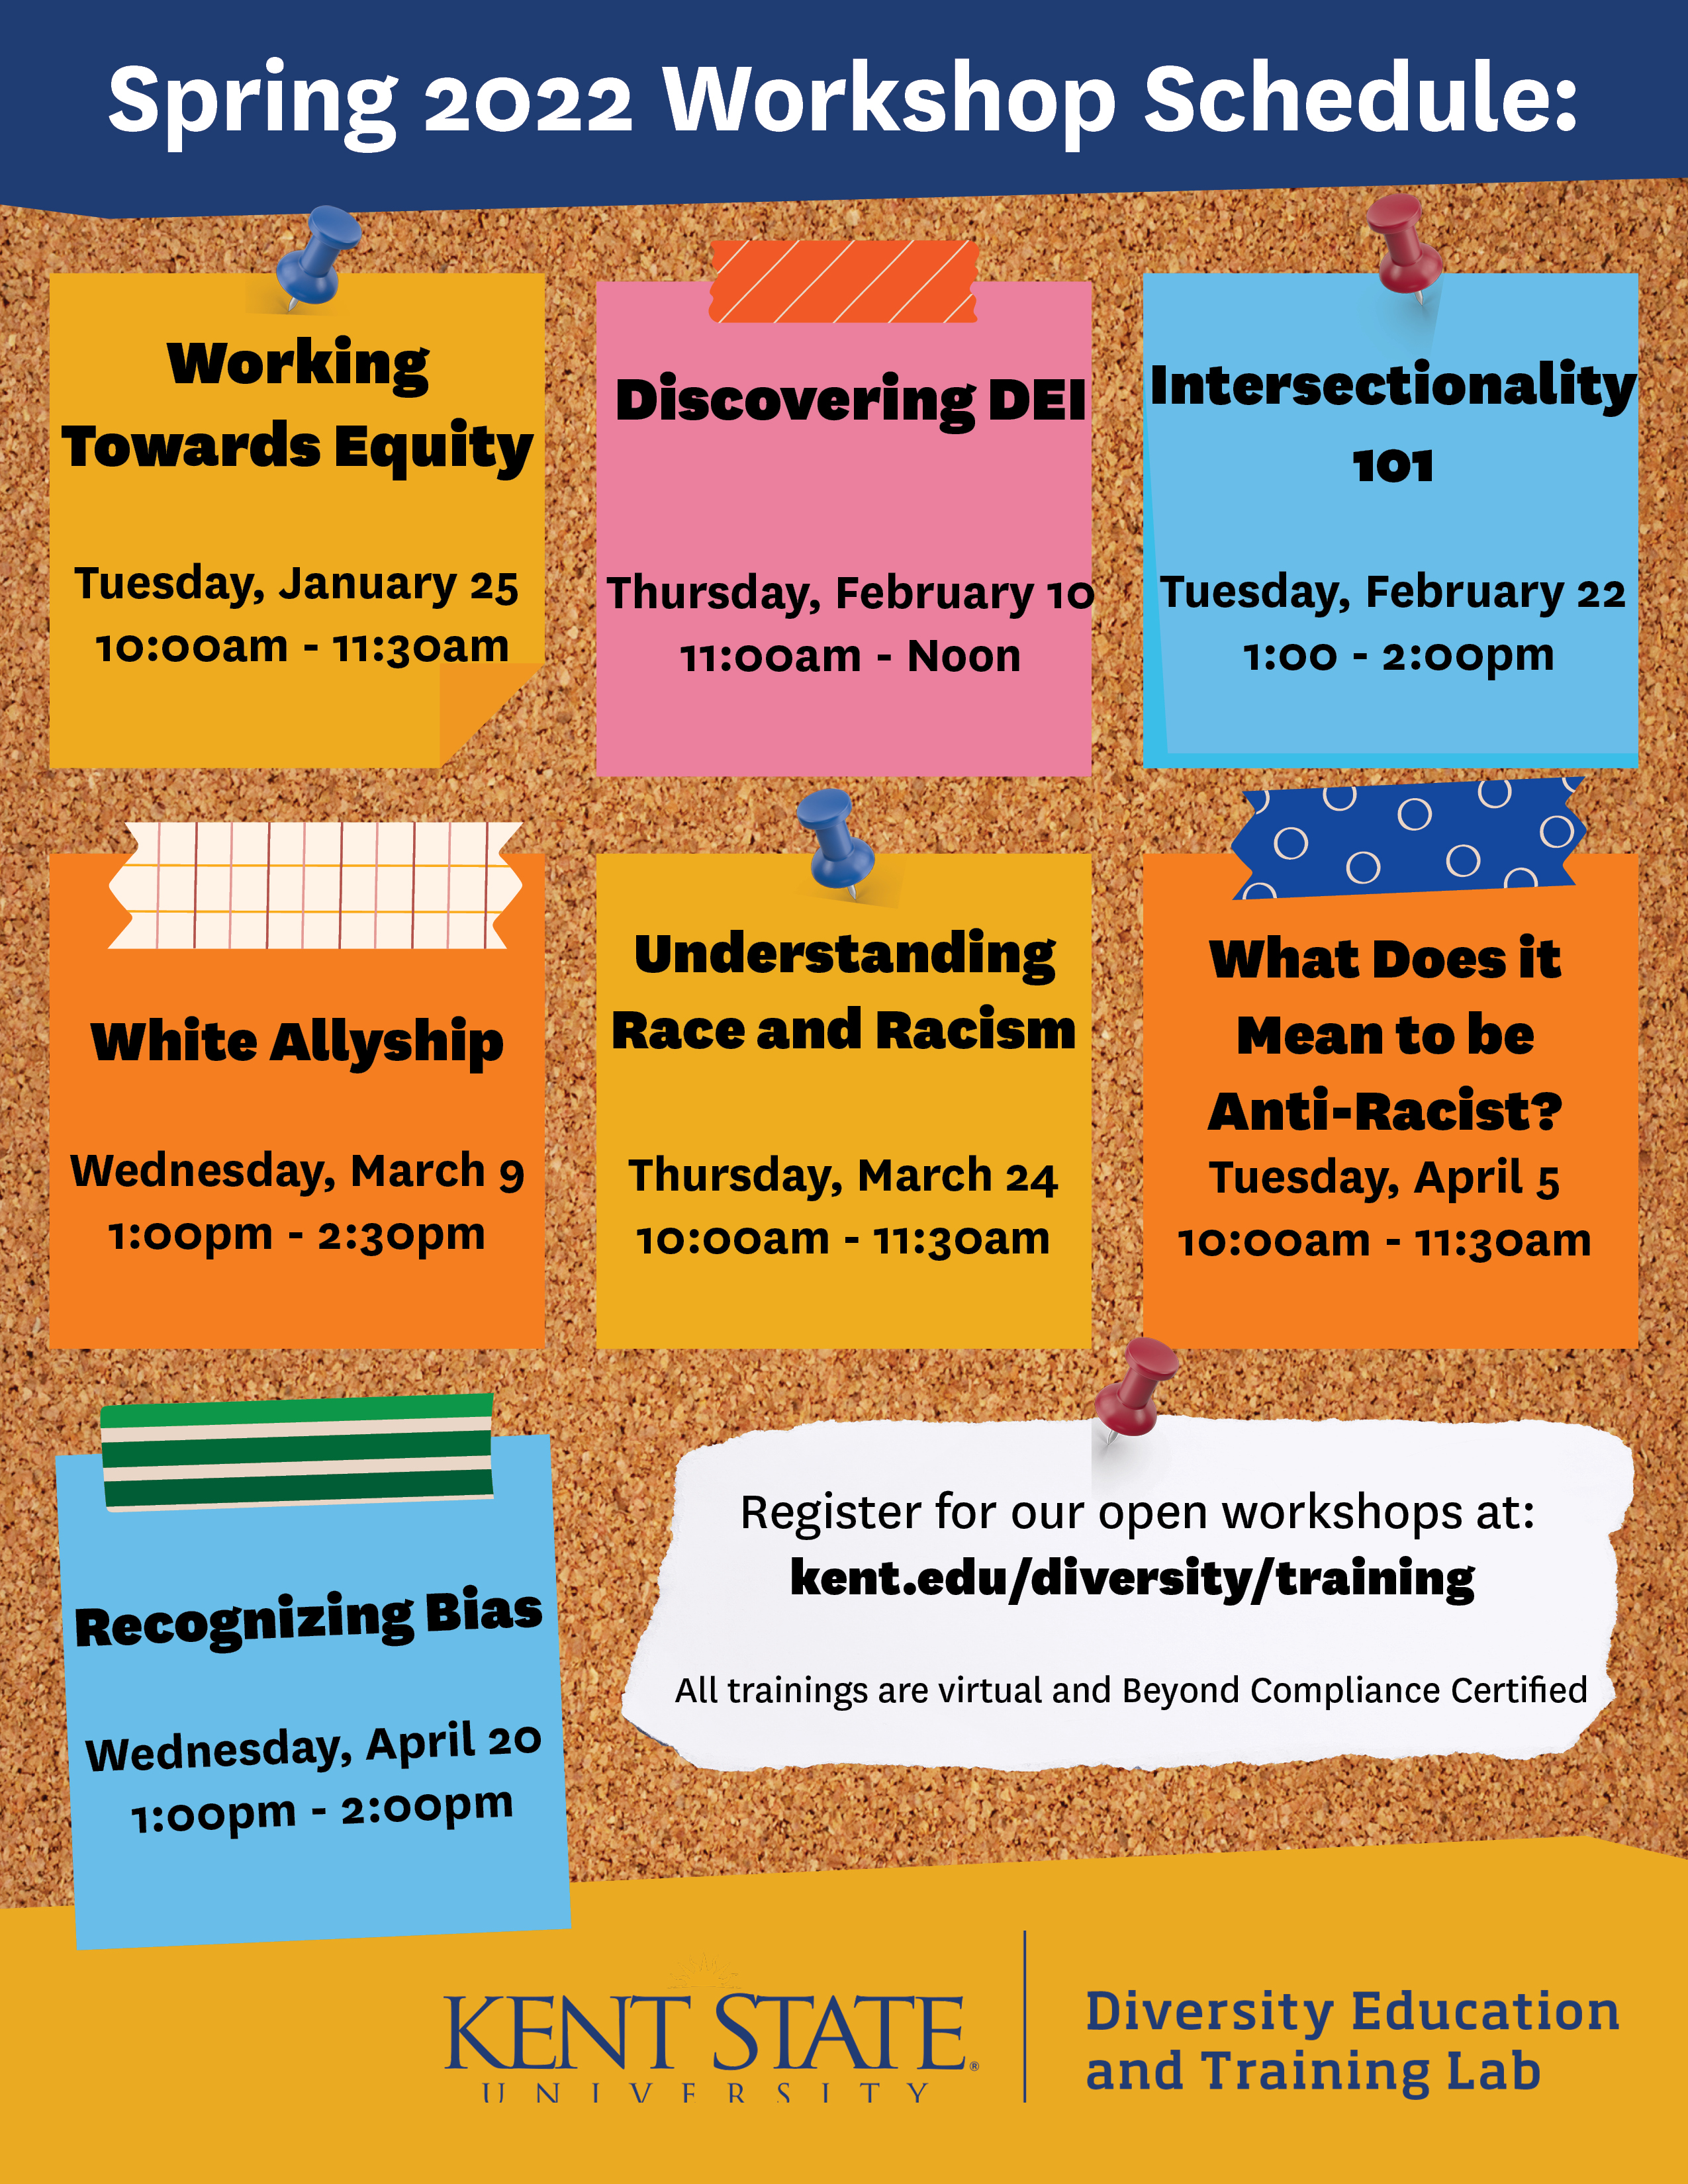 Kent State Fall 2022 Schedule Kent State Diversity, Equity And Inclusion (@Deikentstate) / Twitter